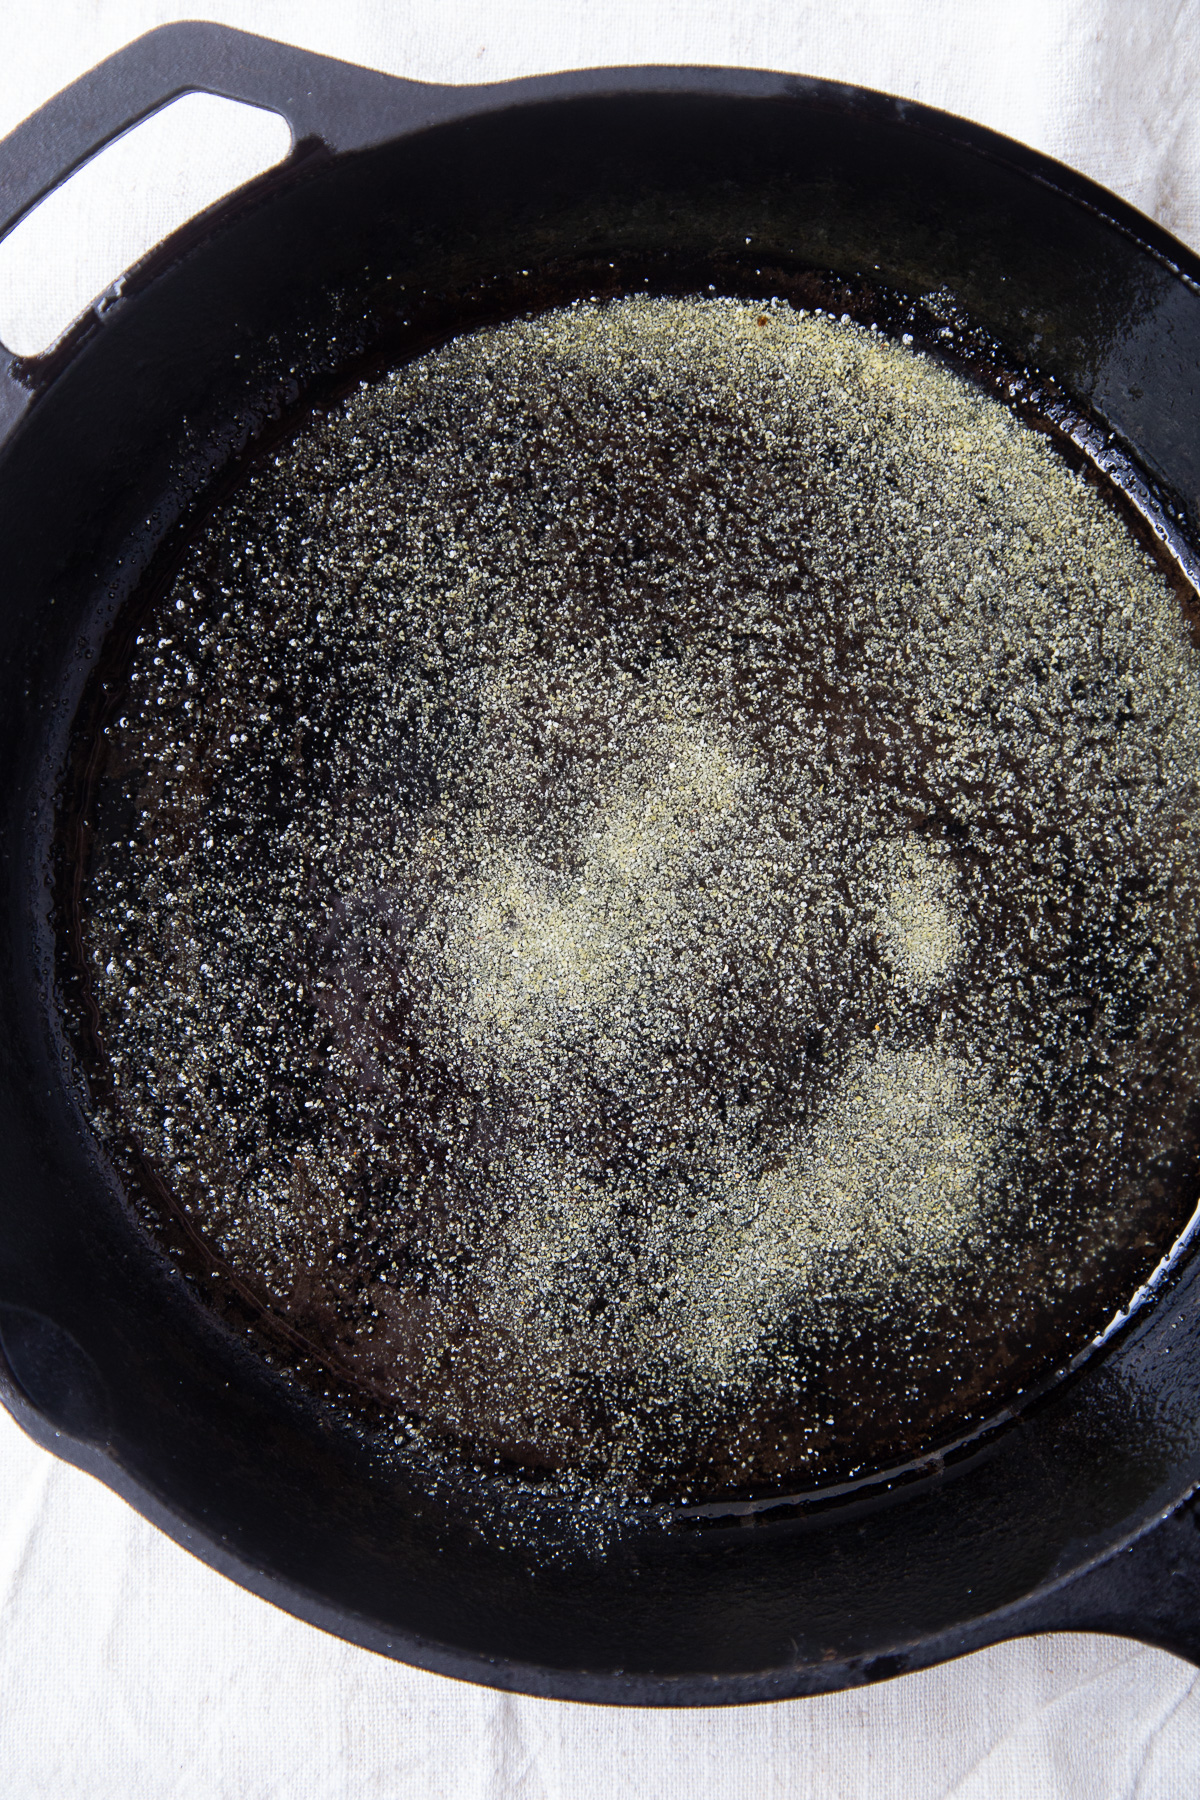 cornmeal and oil in a cast iron pan.